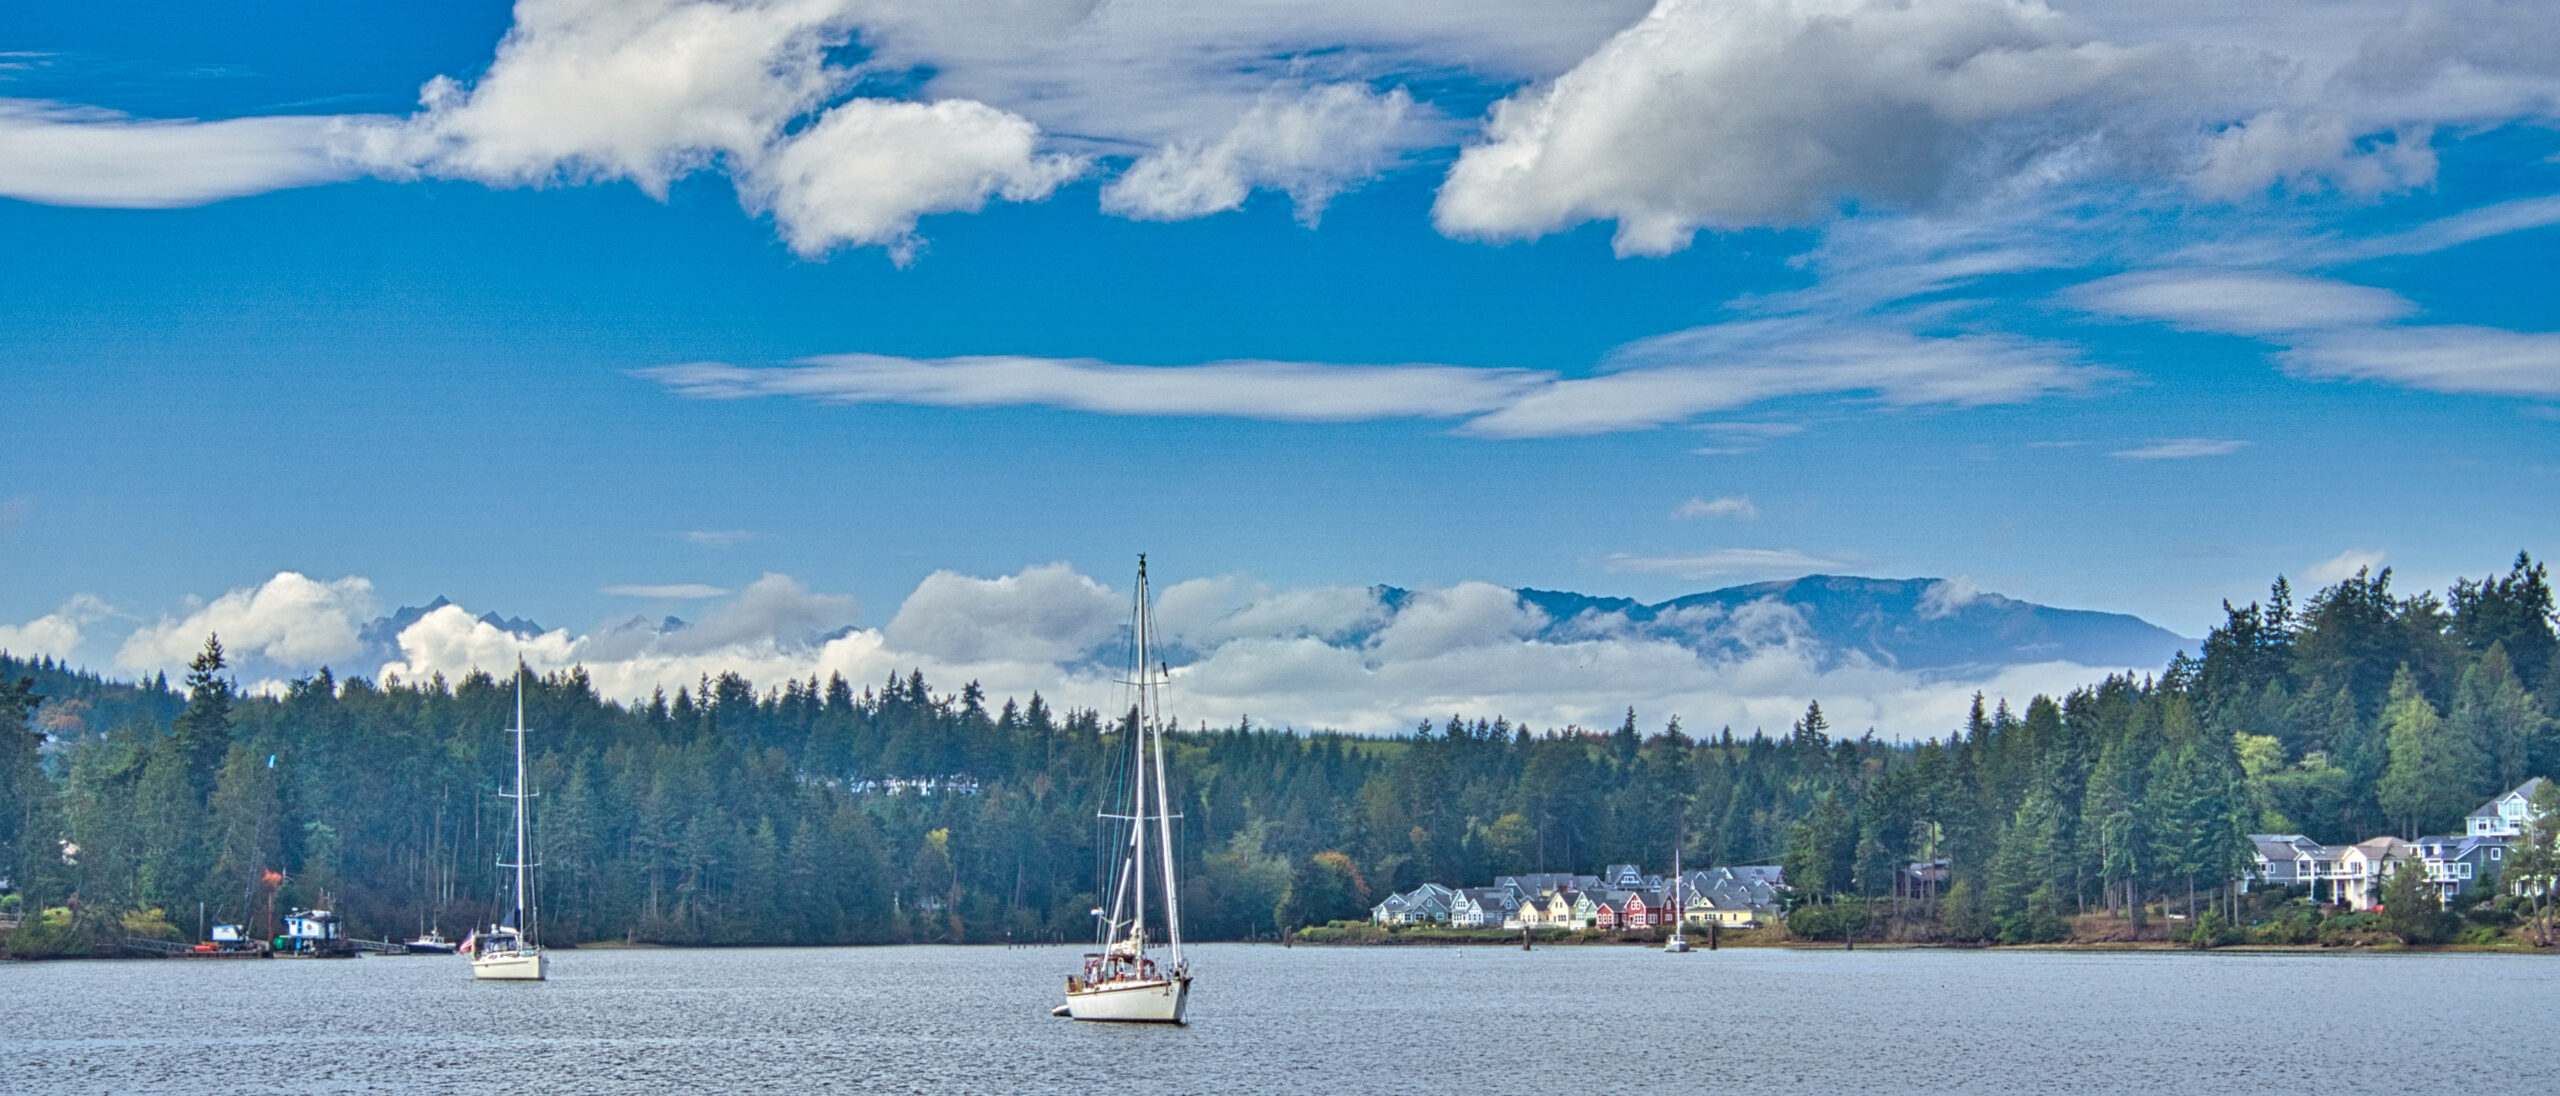 Looking toward the Olympic Mountains from Port Ludlow